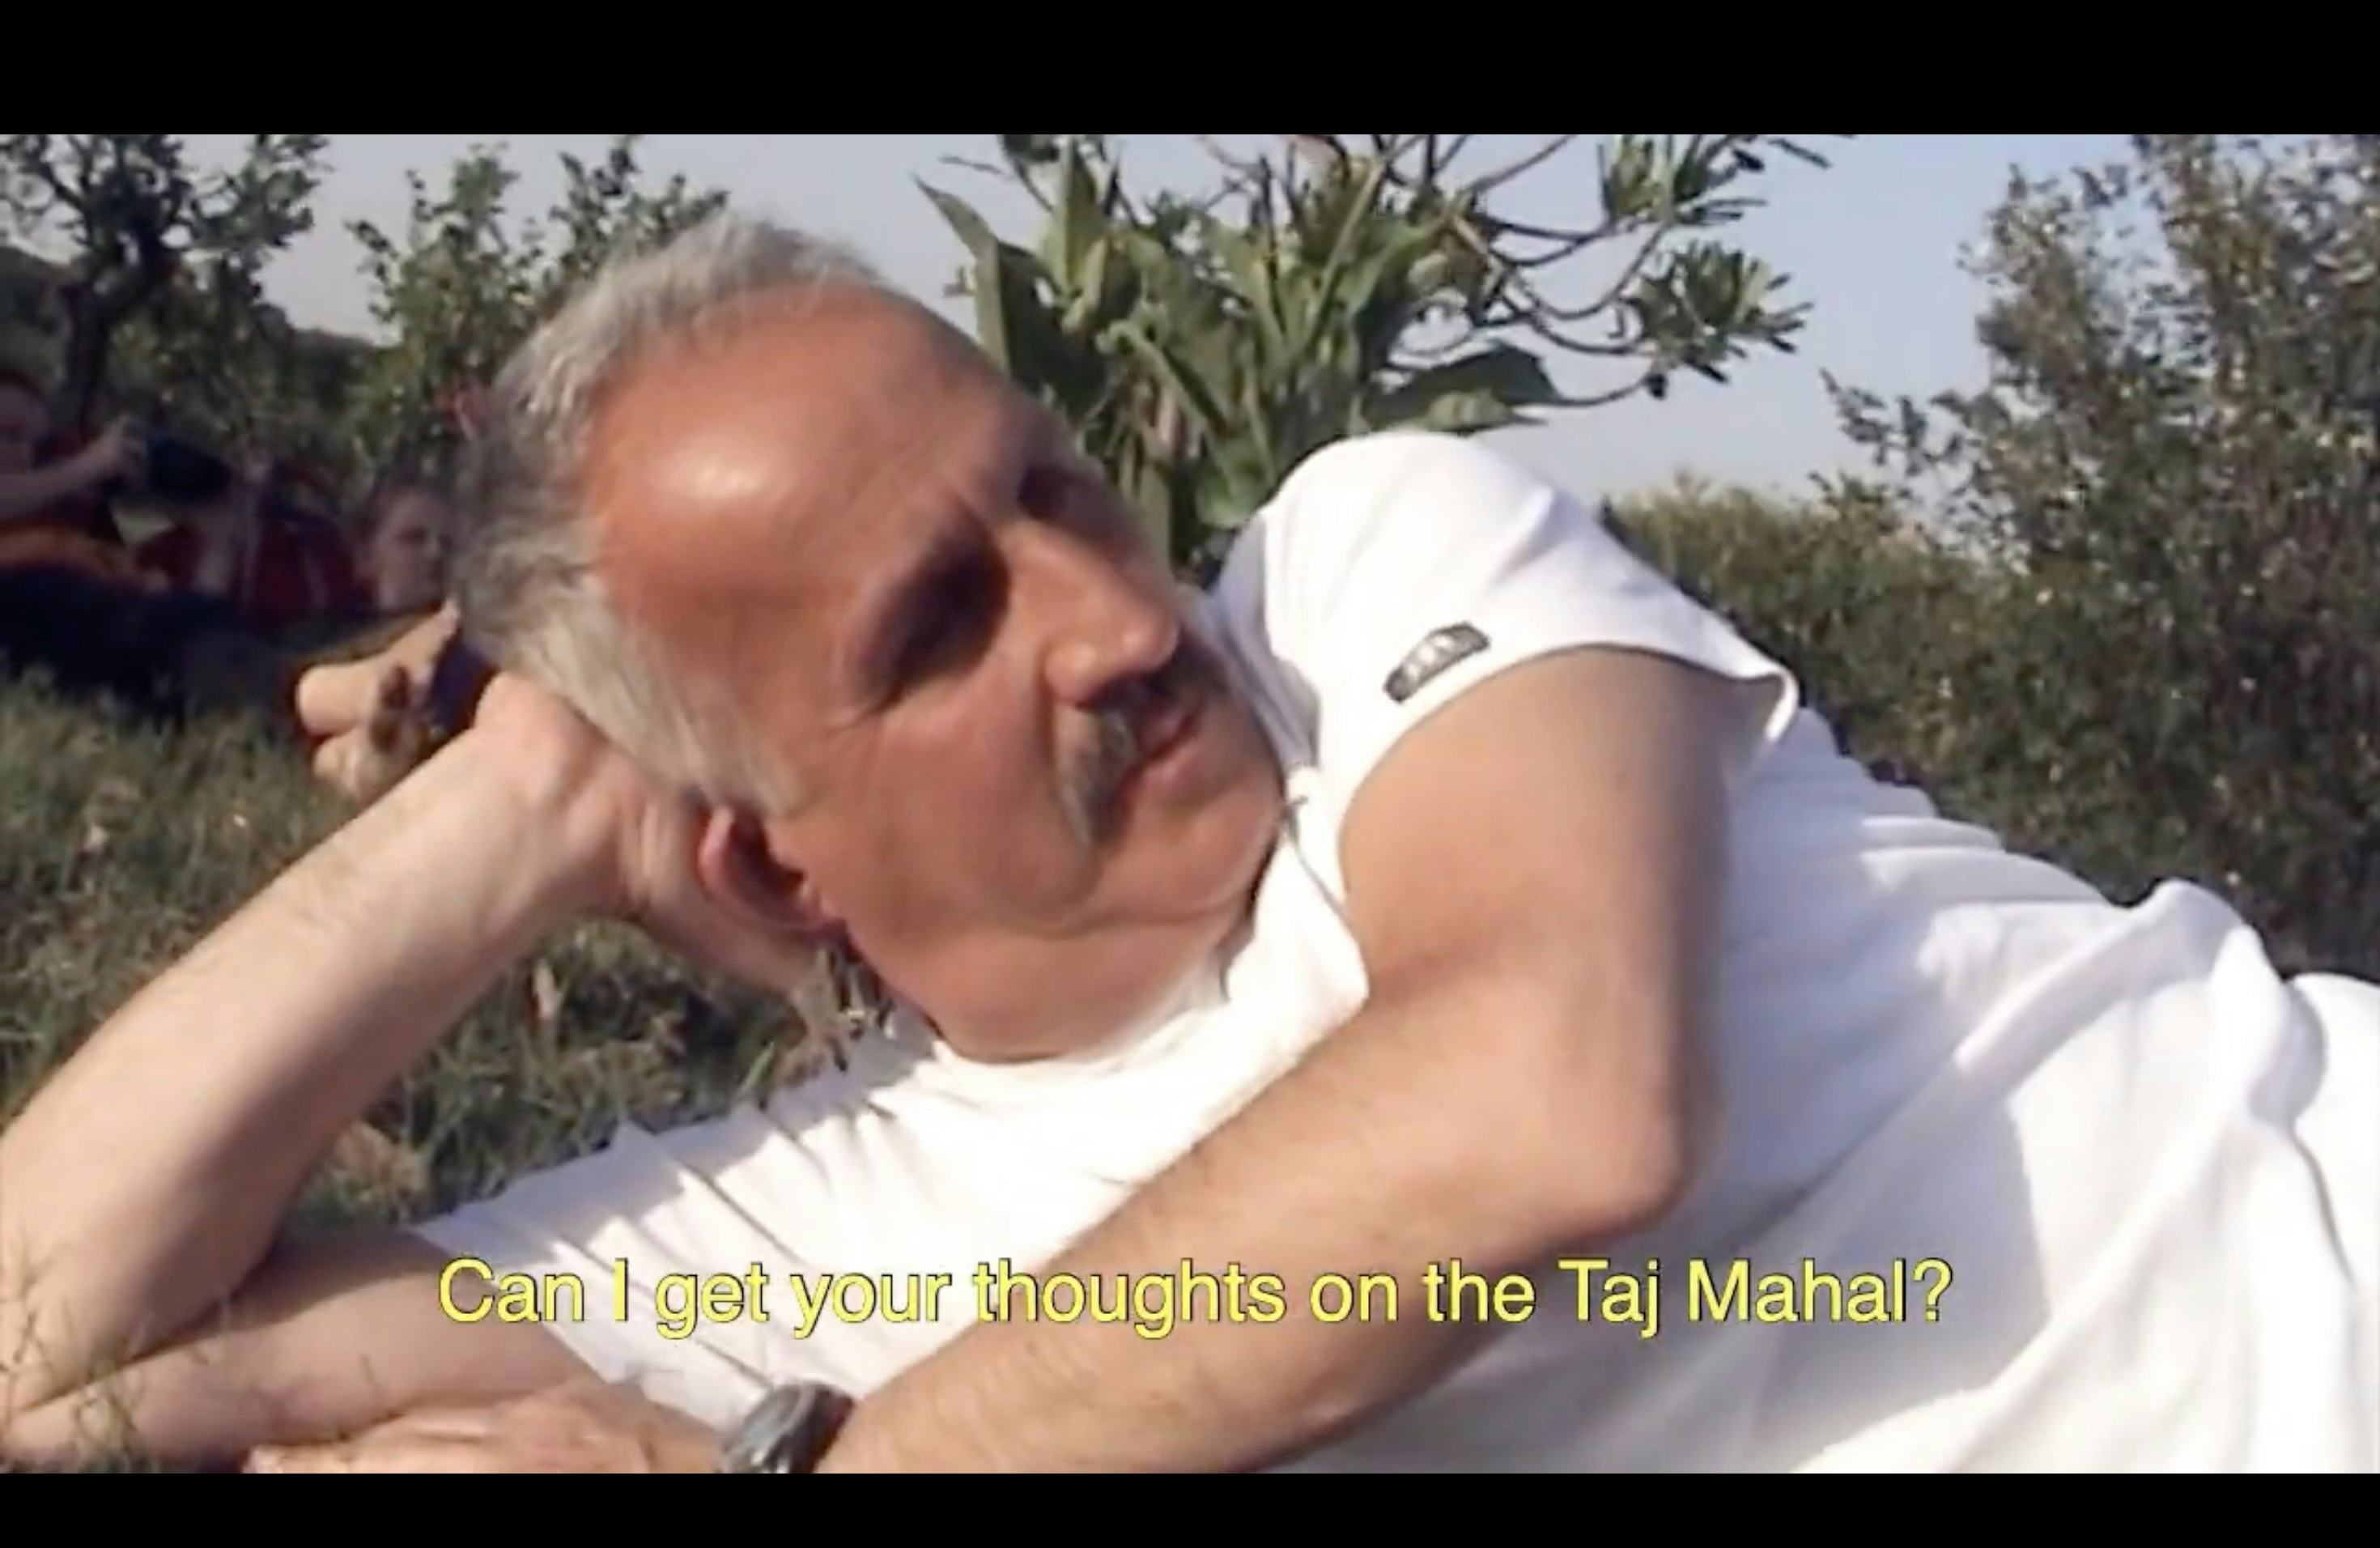 Screenshot from video showing Hüseyin lying on the grass near Taj Mahal, India. From the project Dad on his search for Hüseyin by Olgaç Bozalp